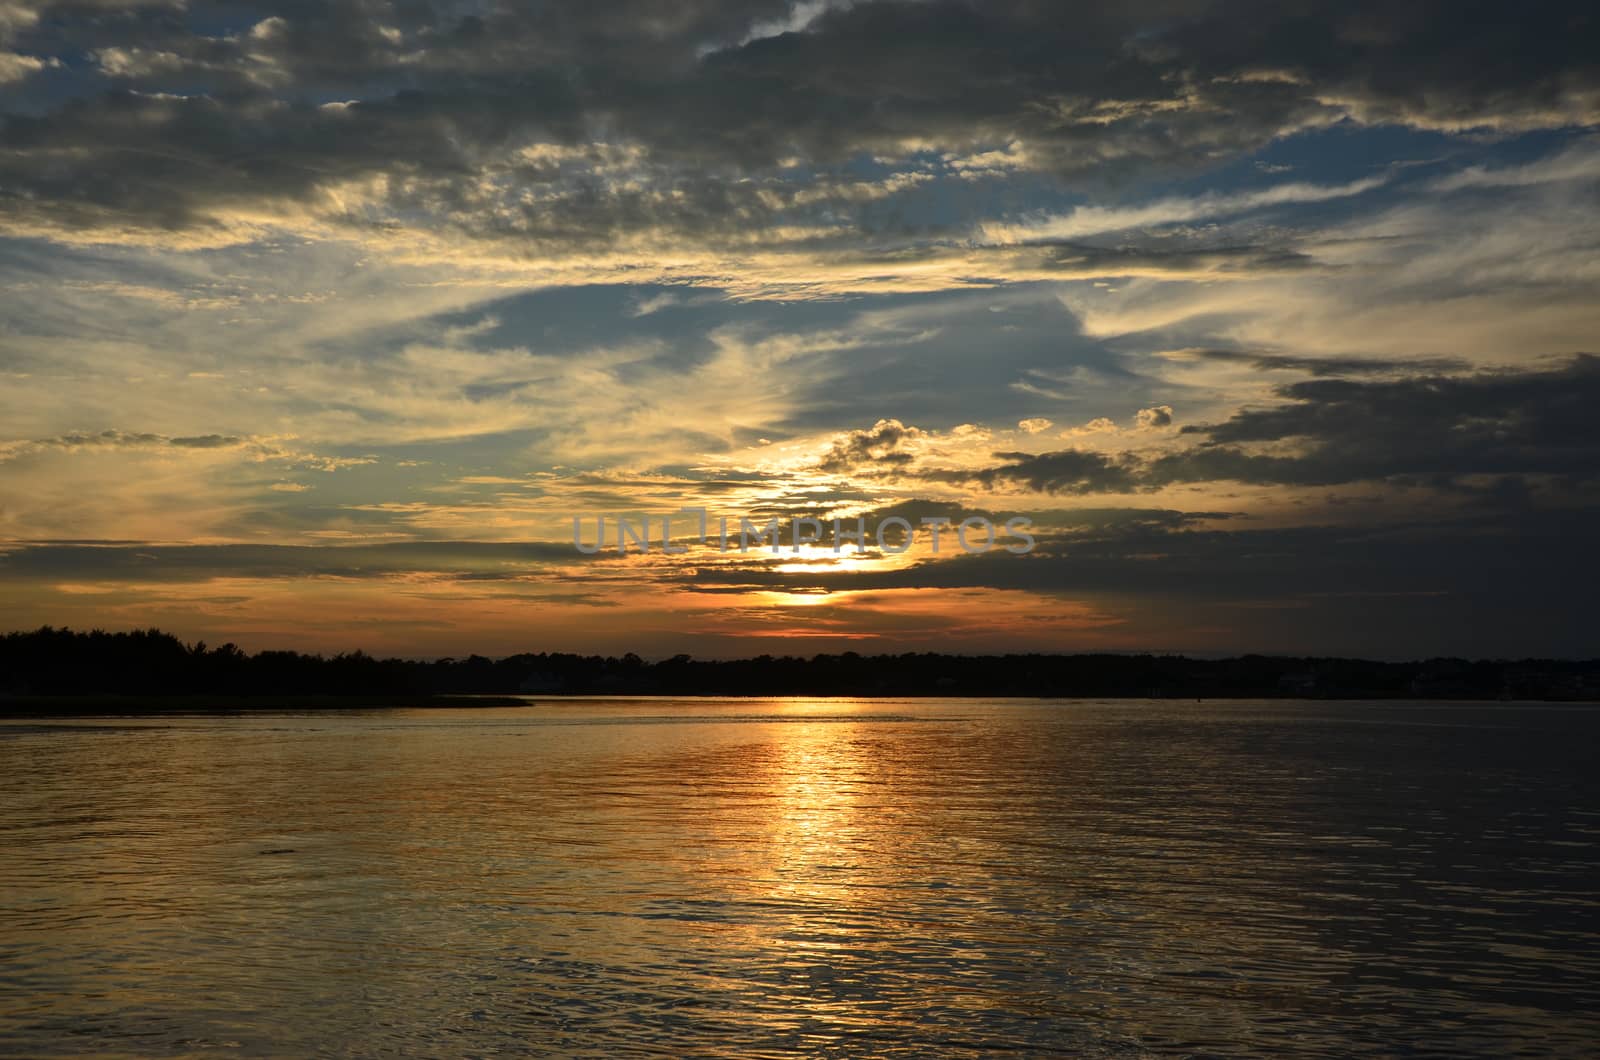 A golden sunset over the waterway in North Carolina